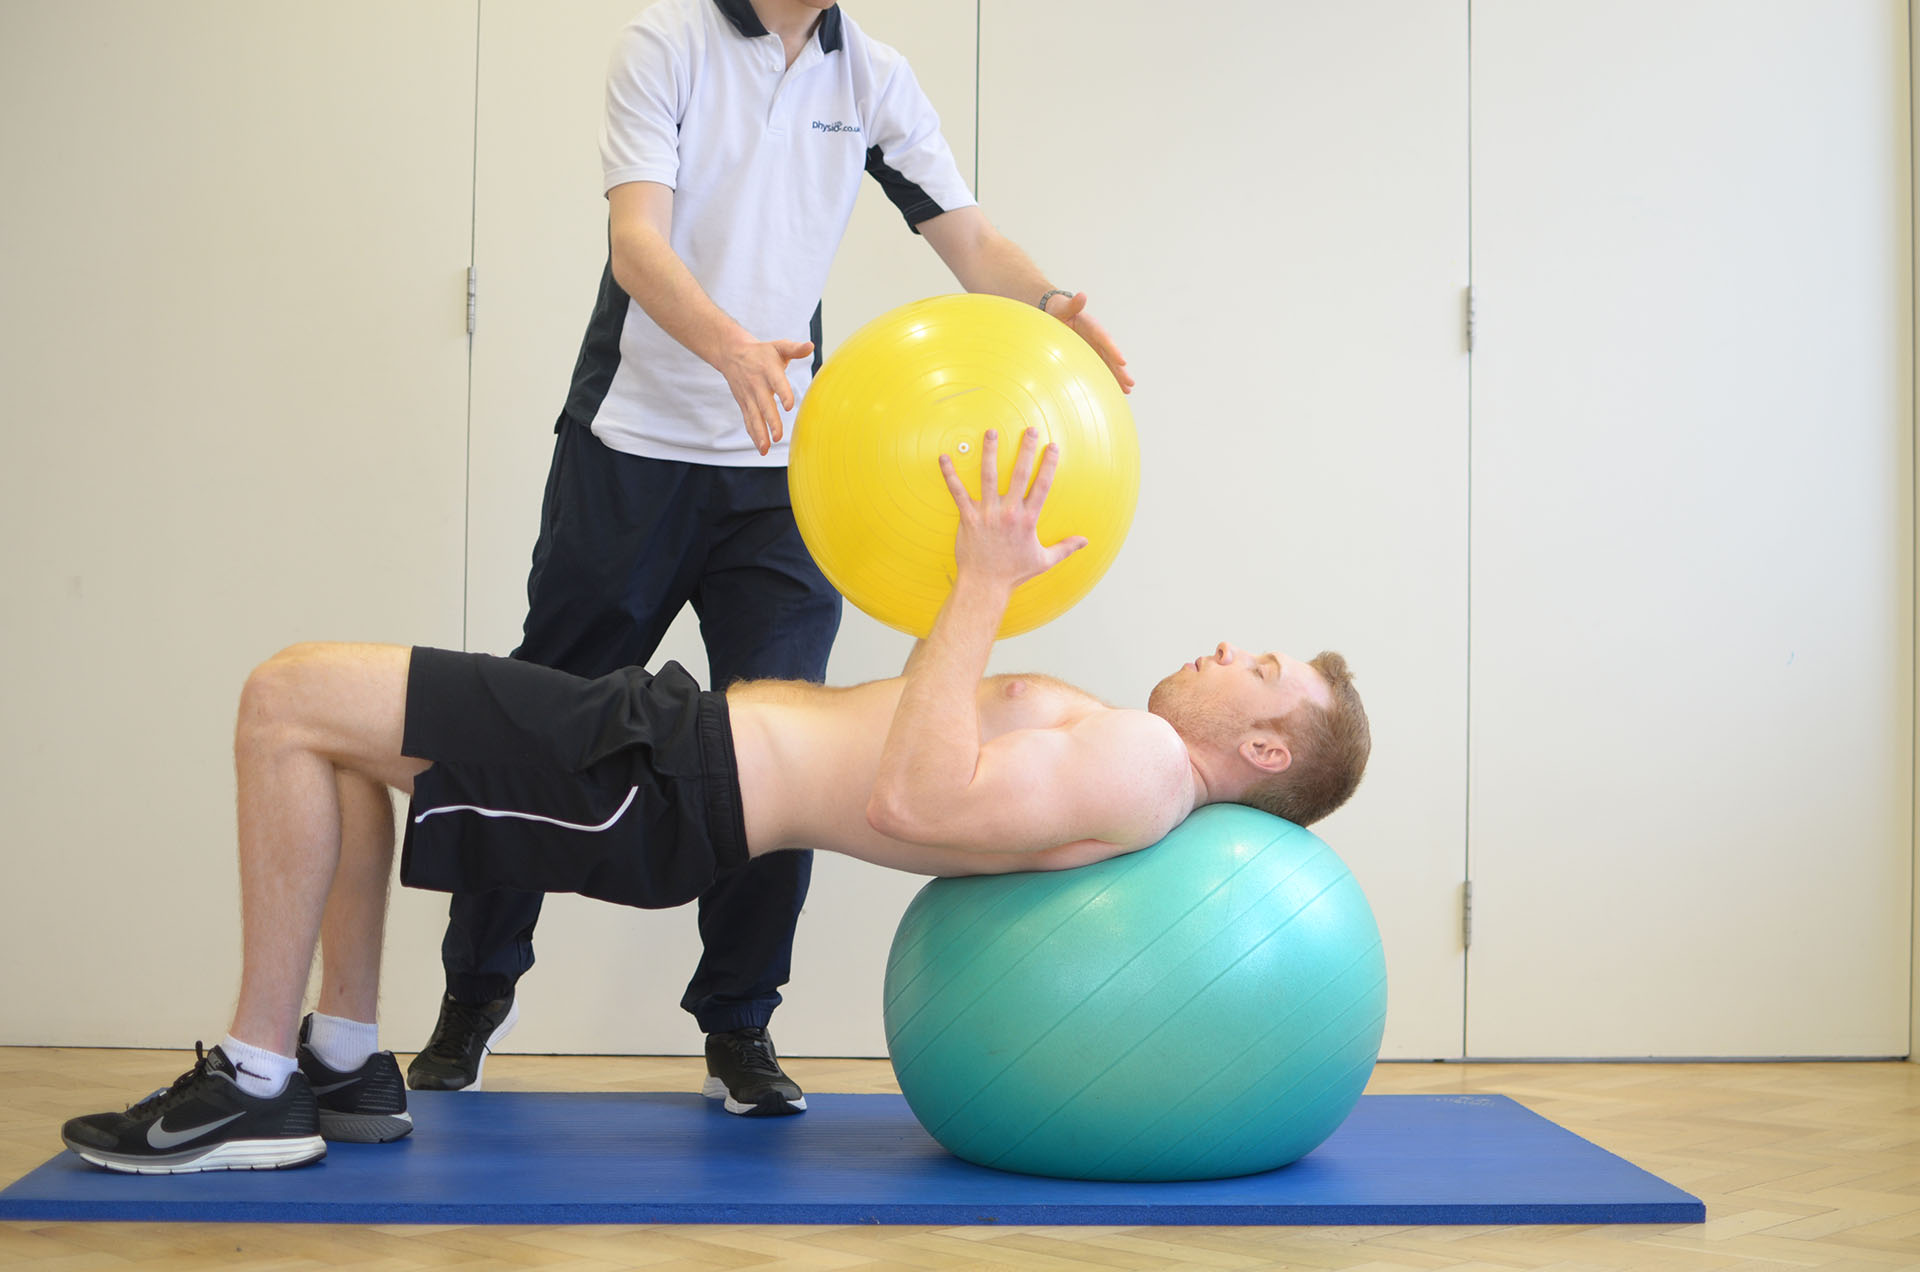 Exercise ball therapy at Manchester Physio clinic